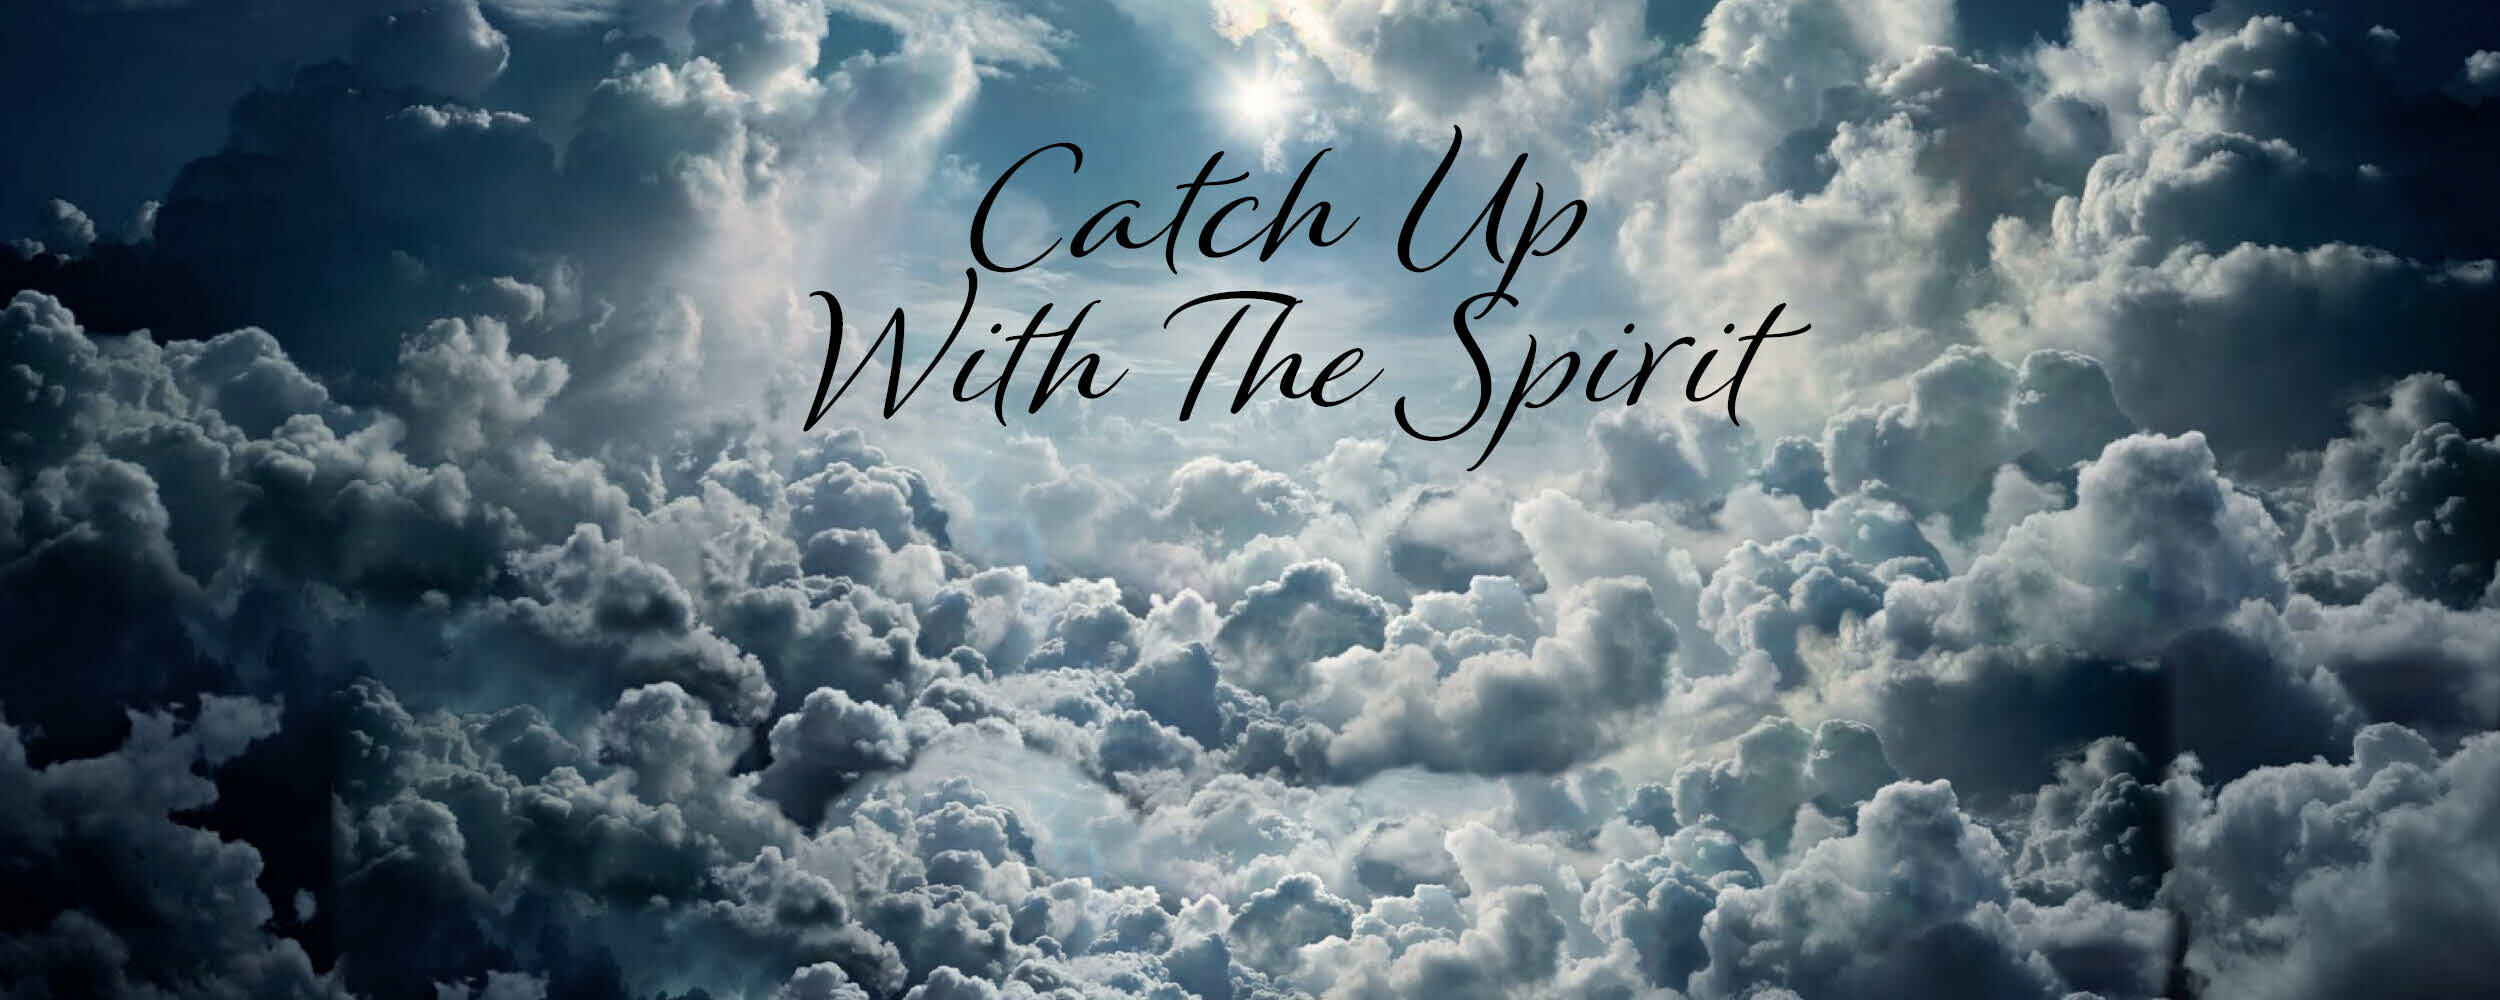 Catch Up With the Spirit